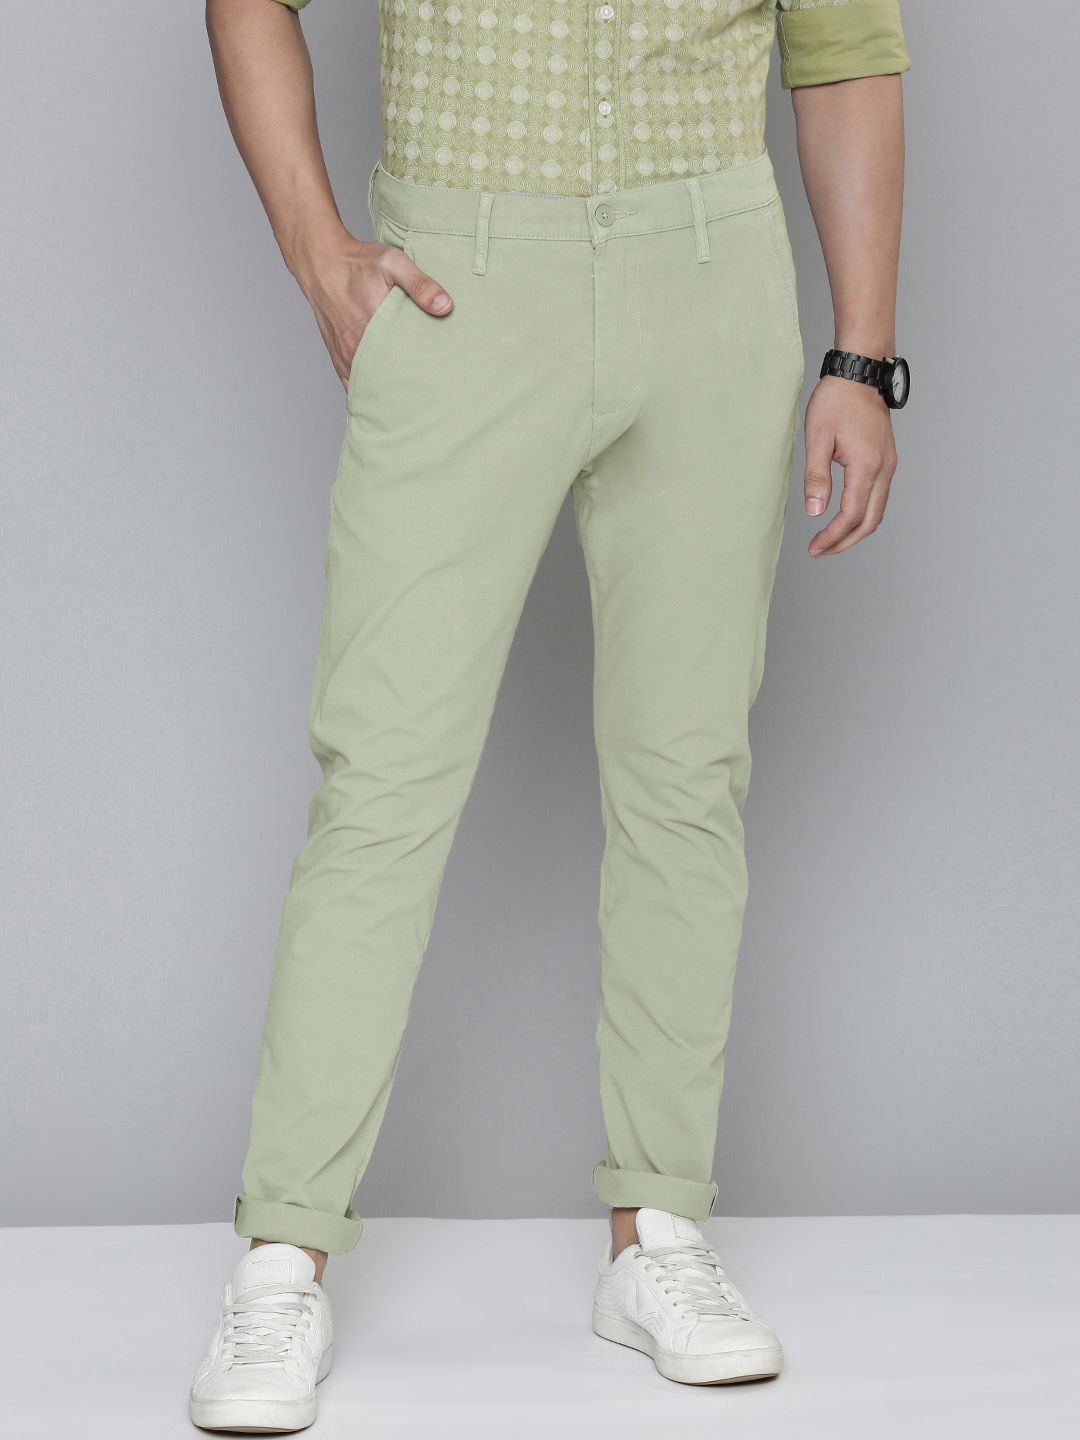 Levi's casual trousers - Buy Levi's casual trousers online in India